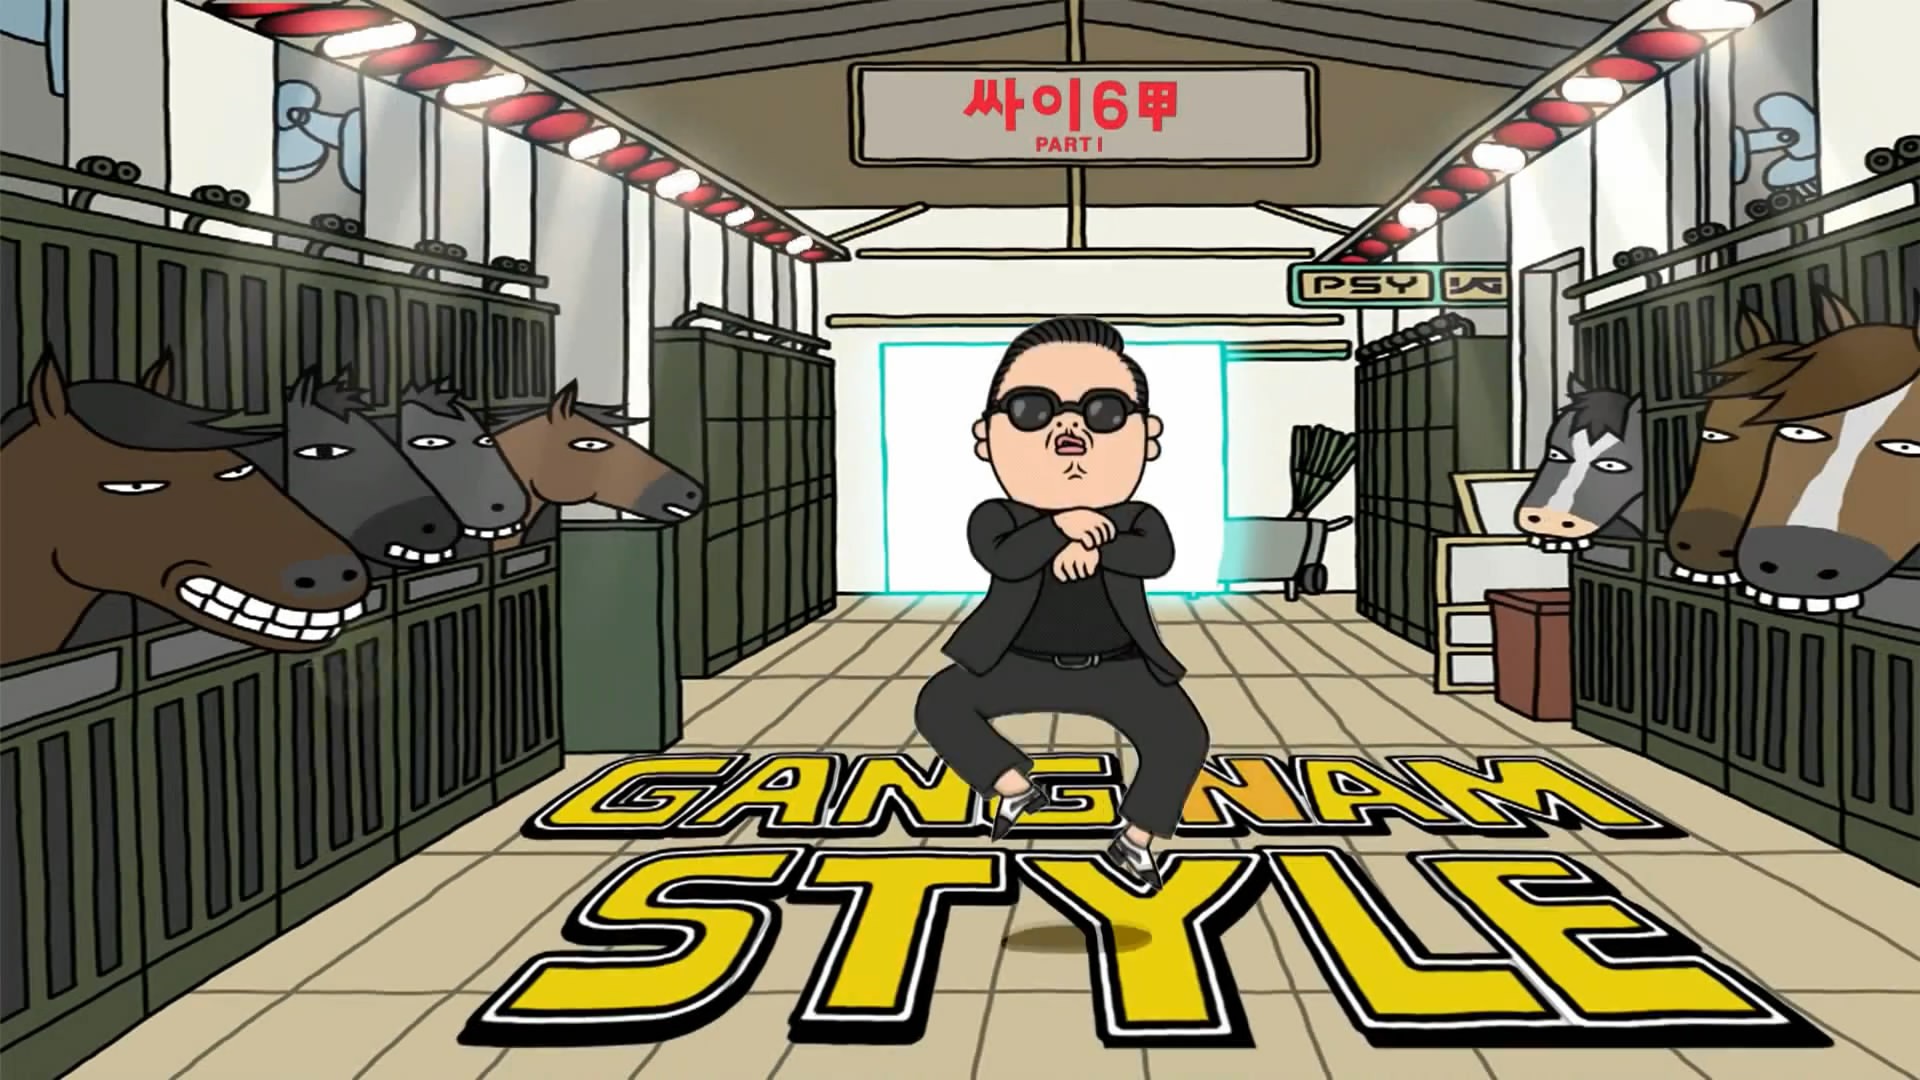 PSY Gangnam Style Cartoon Exclusive HD Wallpapers 3063